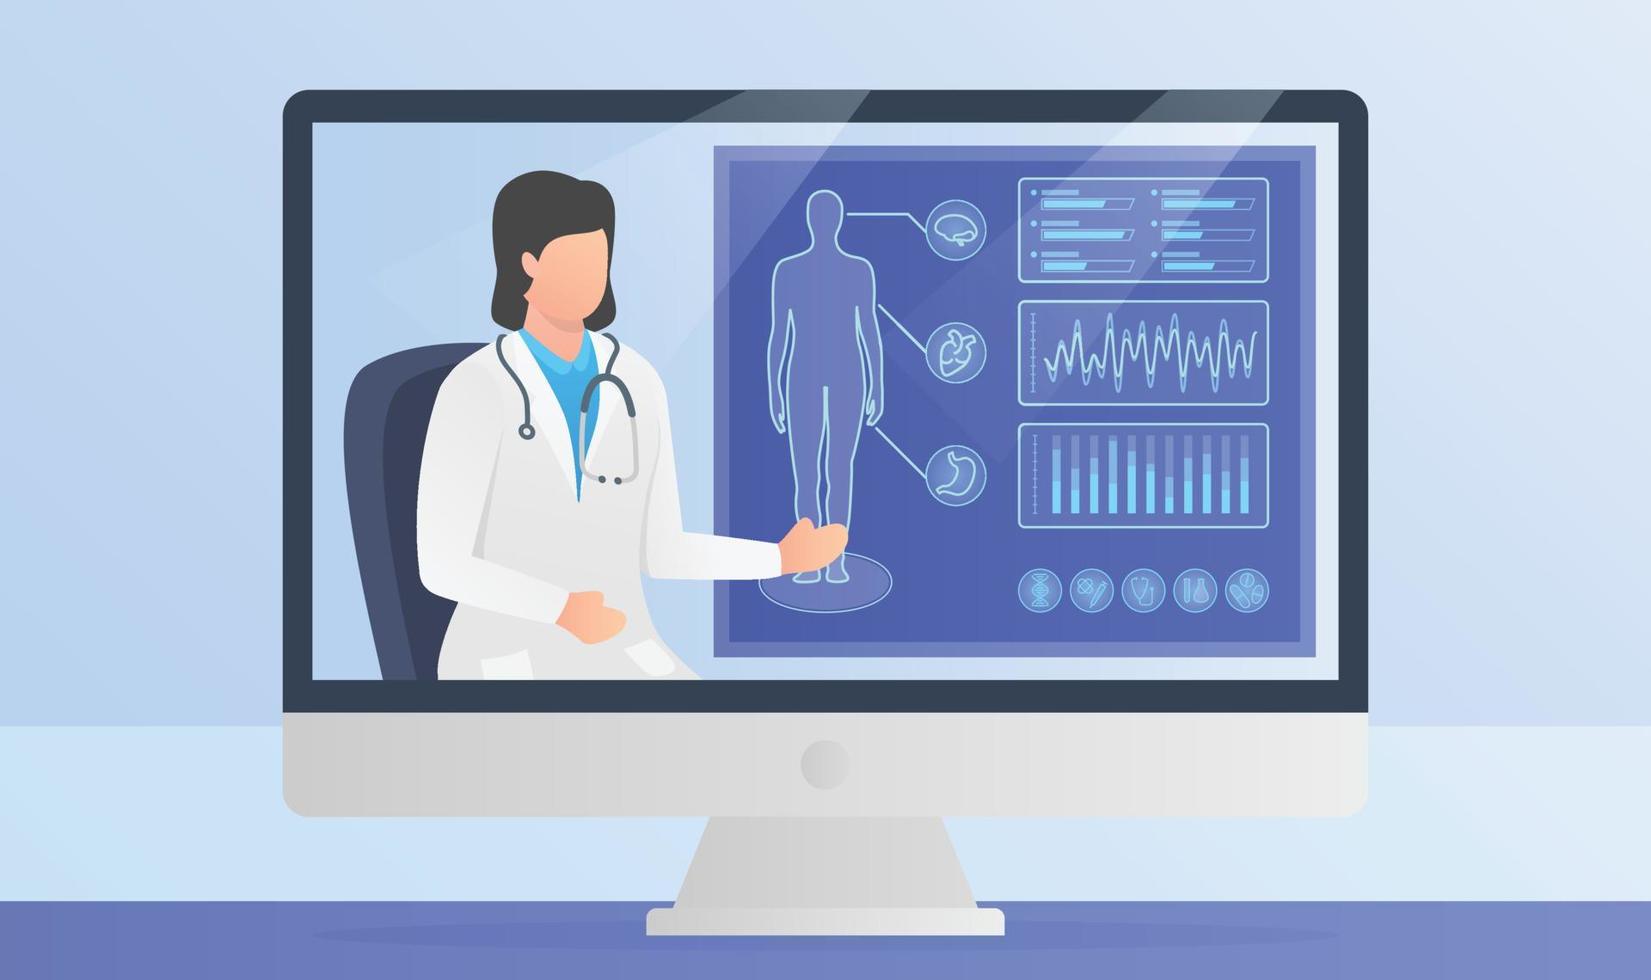 online doctor presentation human body medical reports on monitor computer screen with modern flat style vector